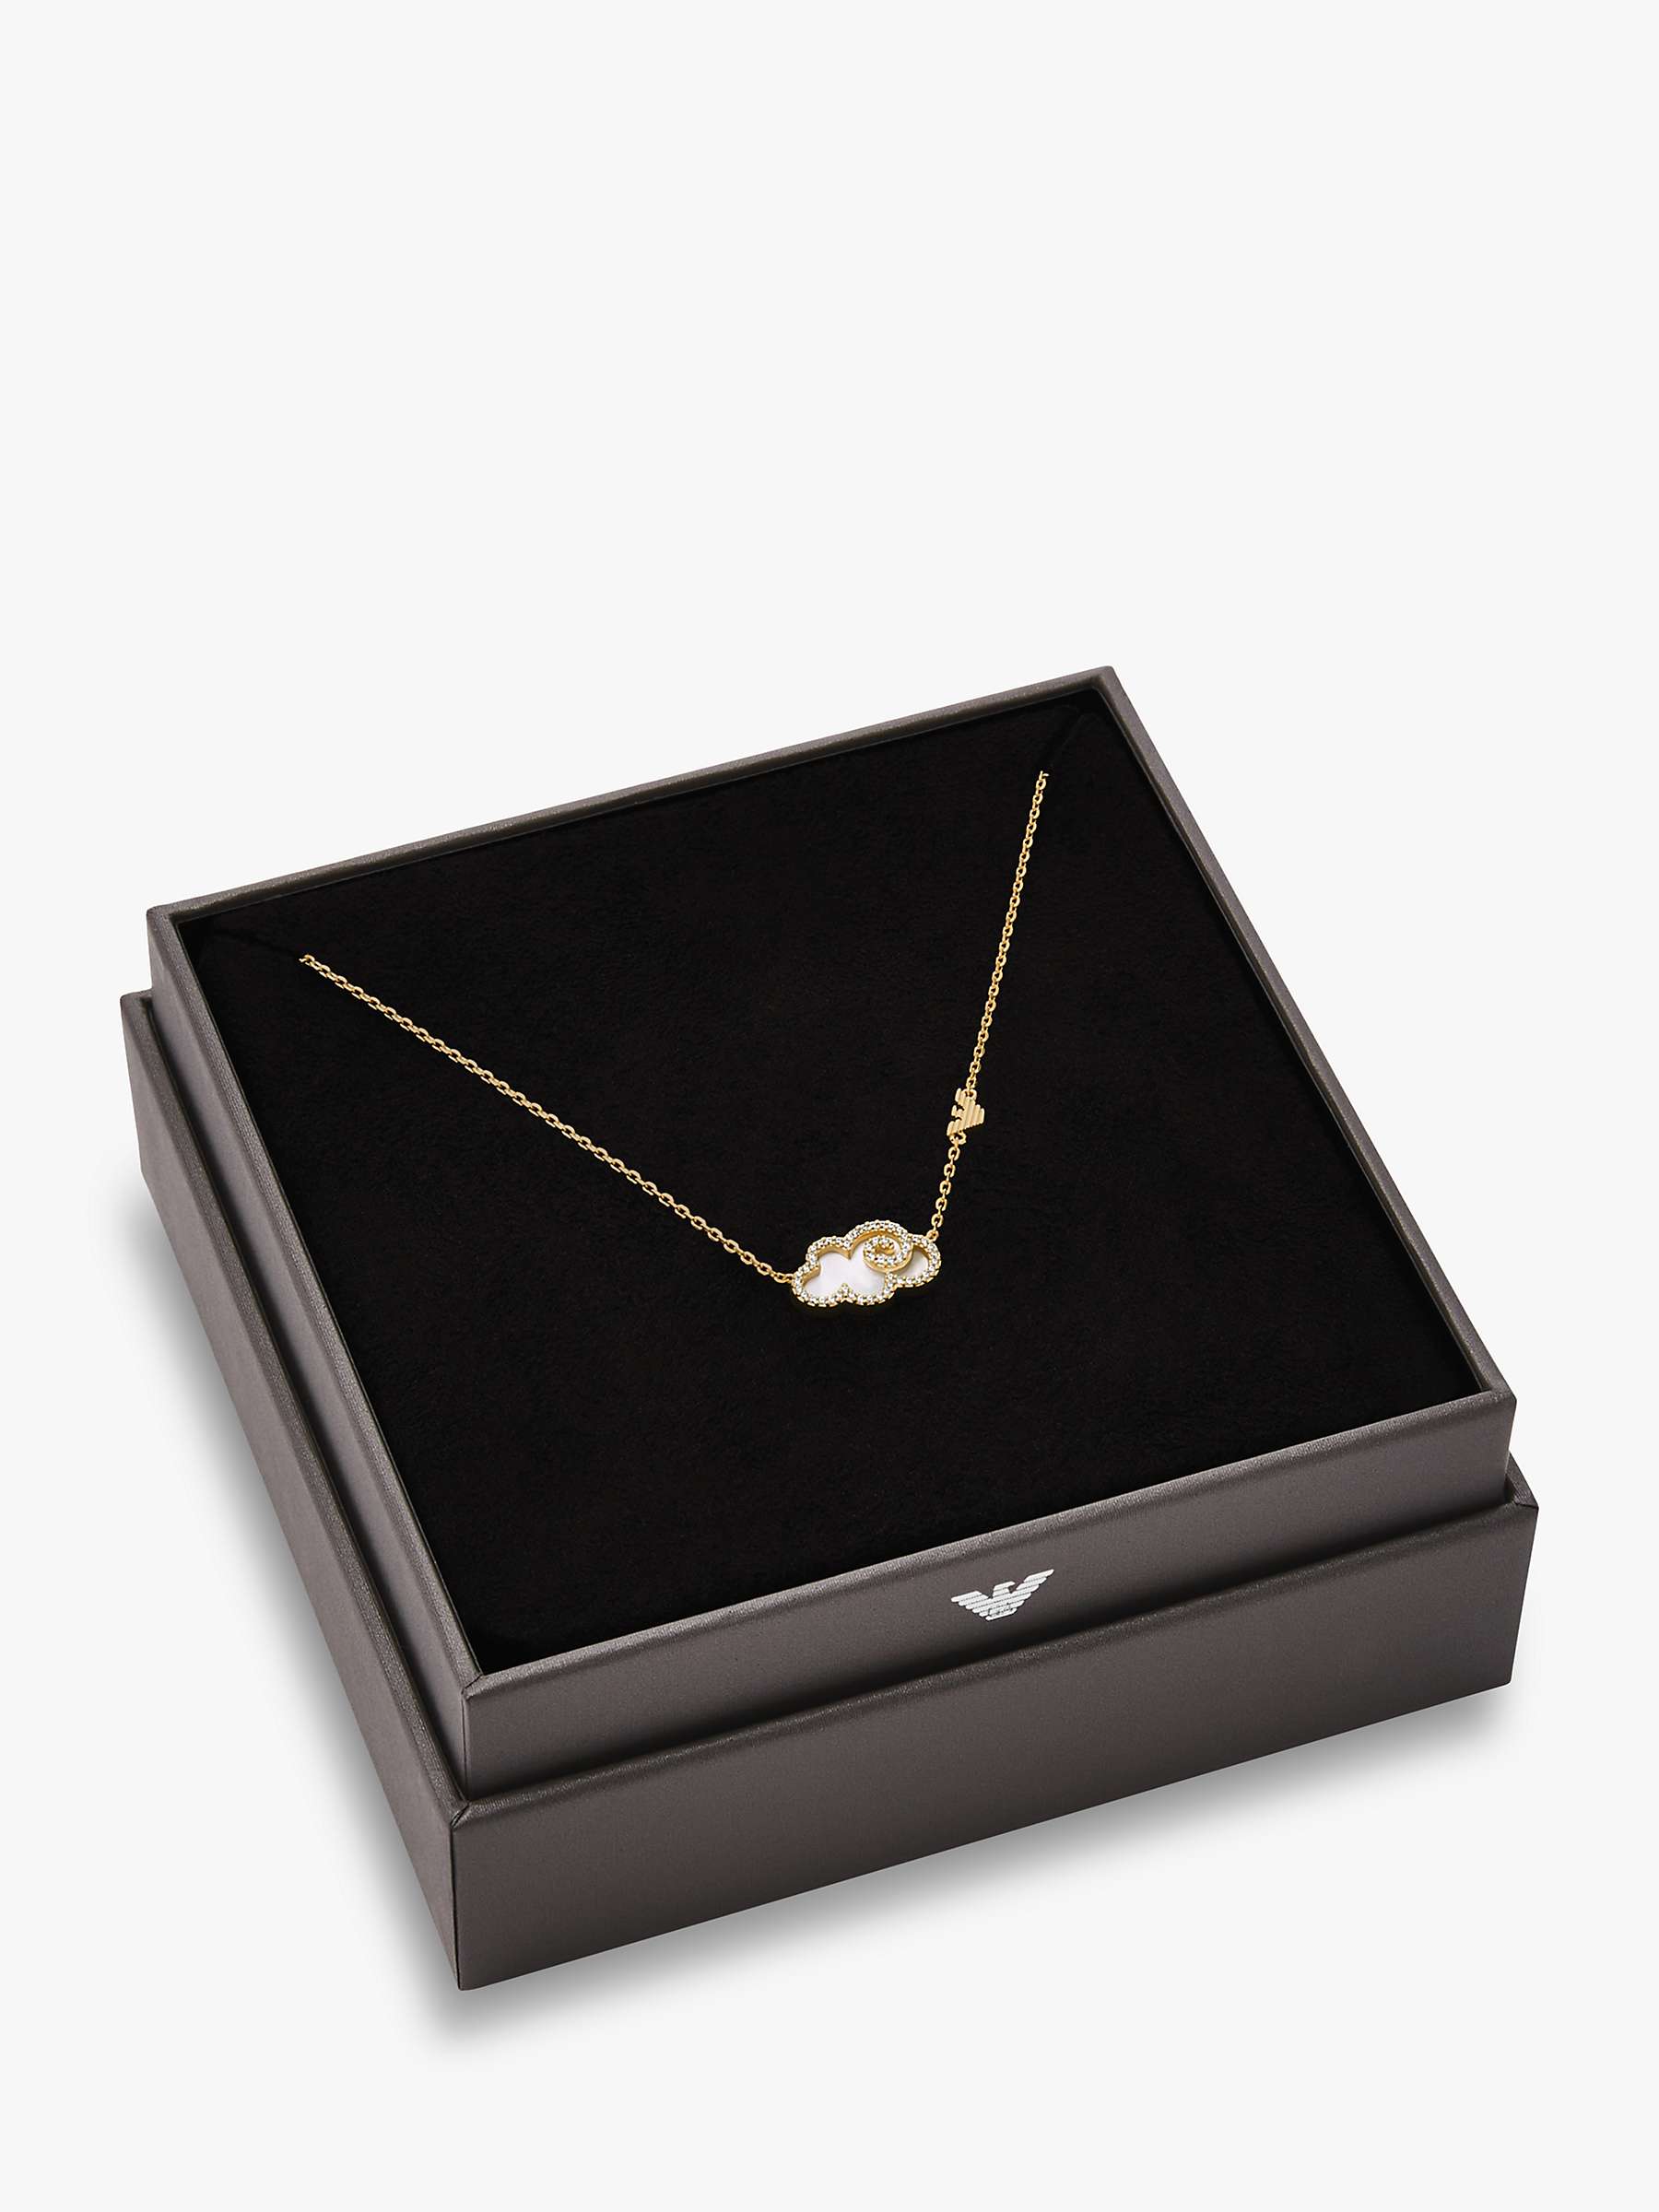 Buy Emporio Armani Cloud Mother of Pearl Pendant Necklace/Gold Online at johnlewis.com